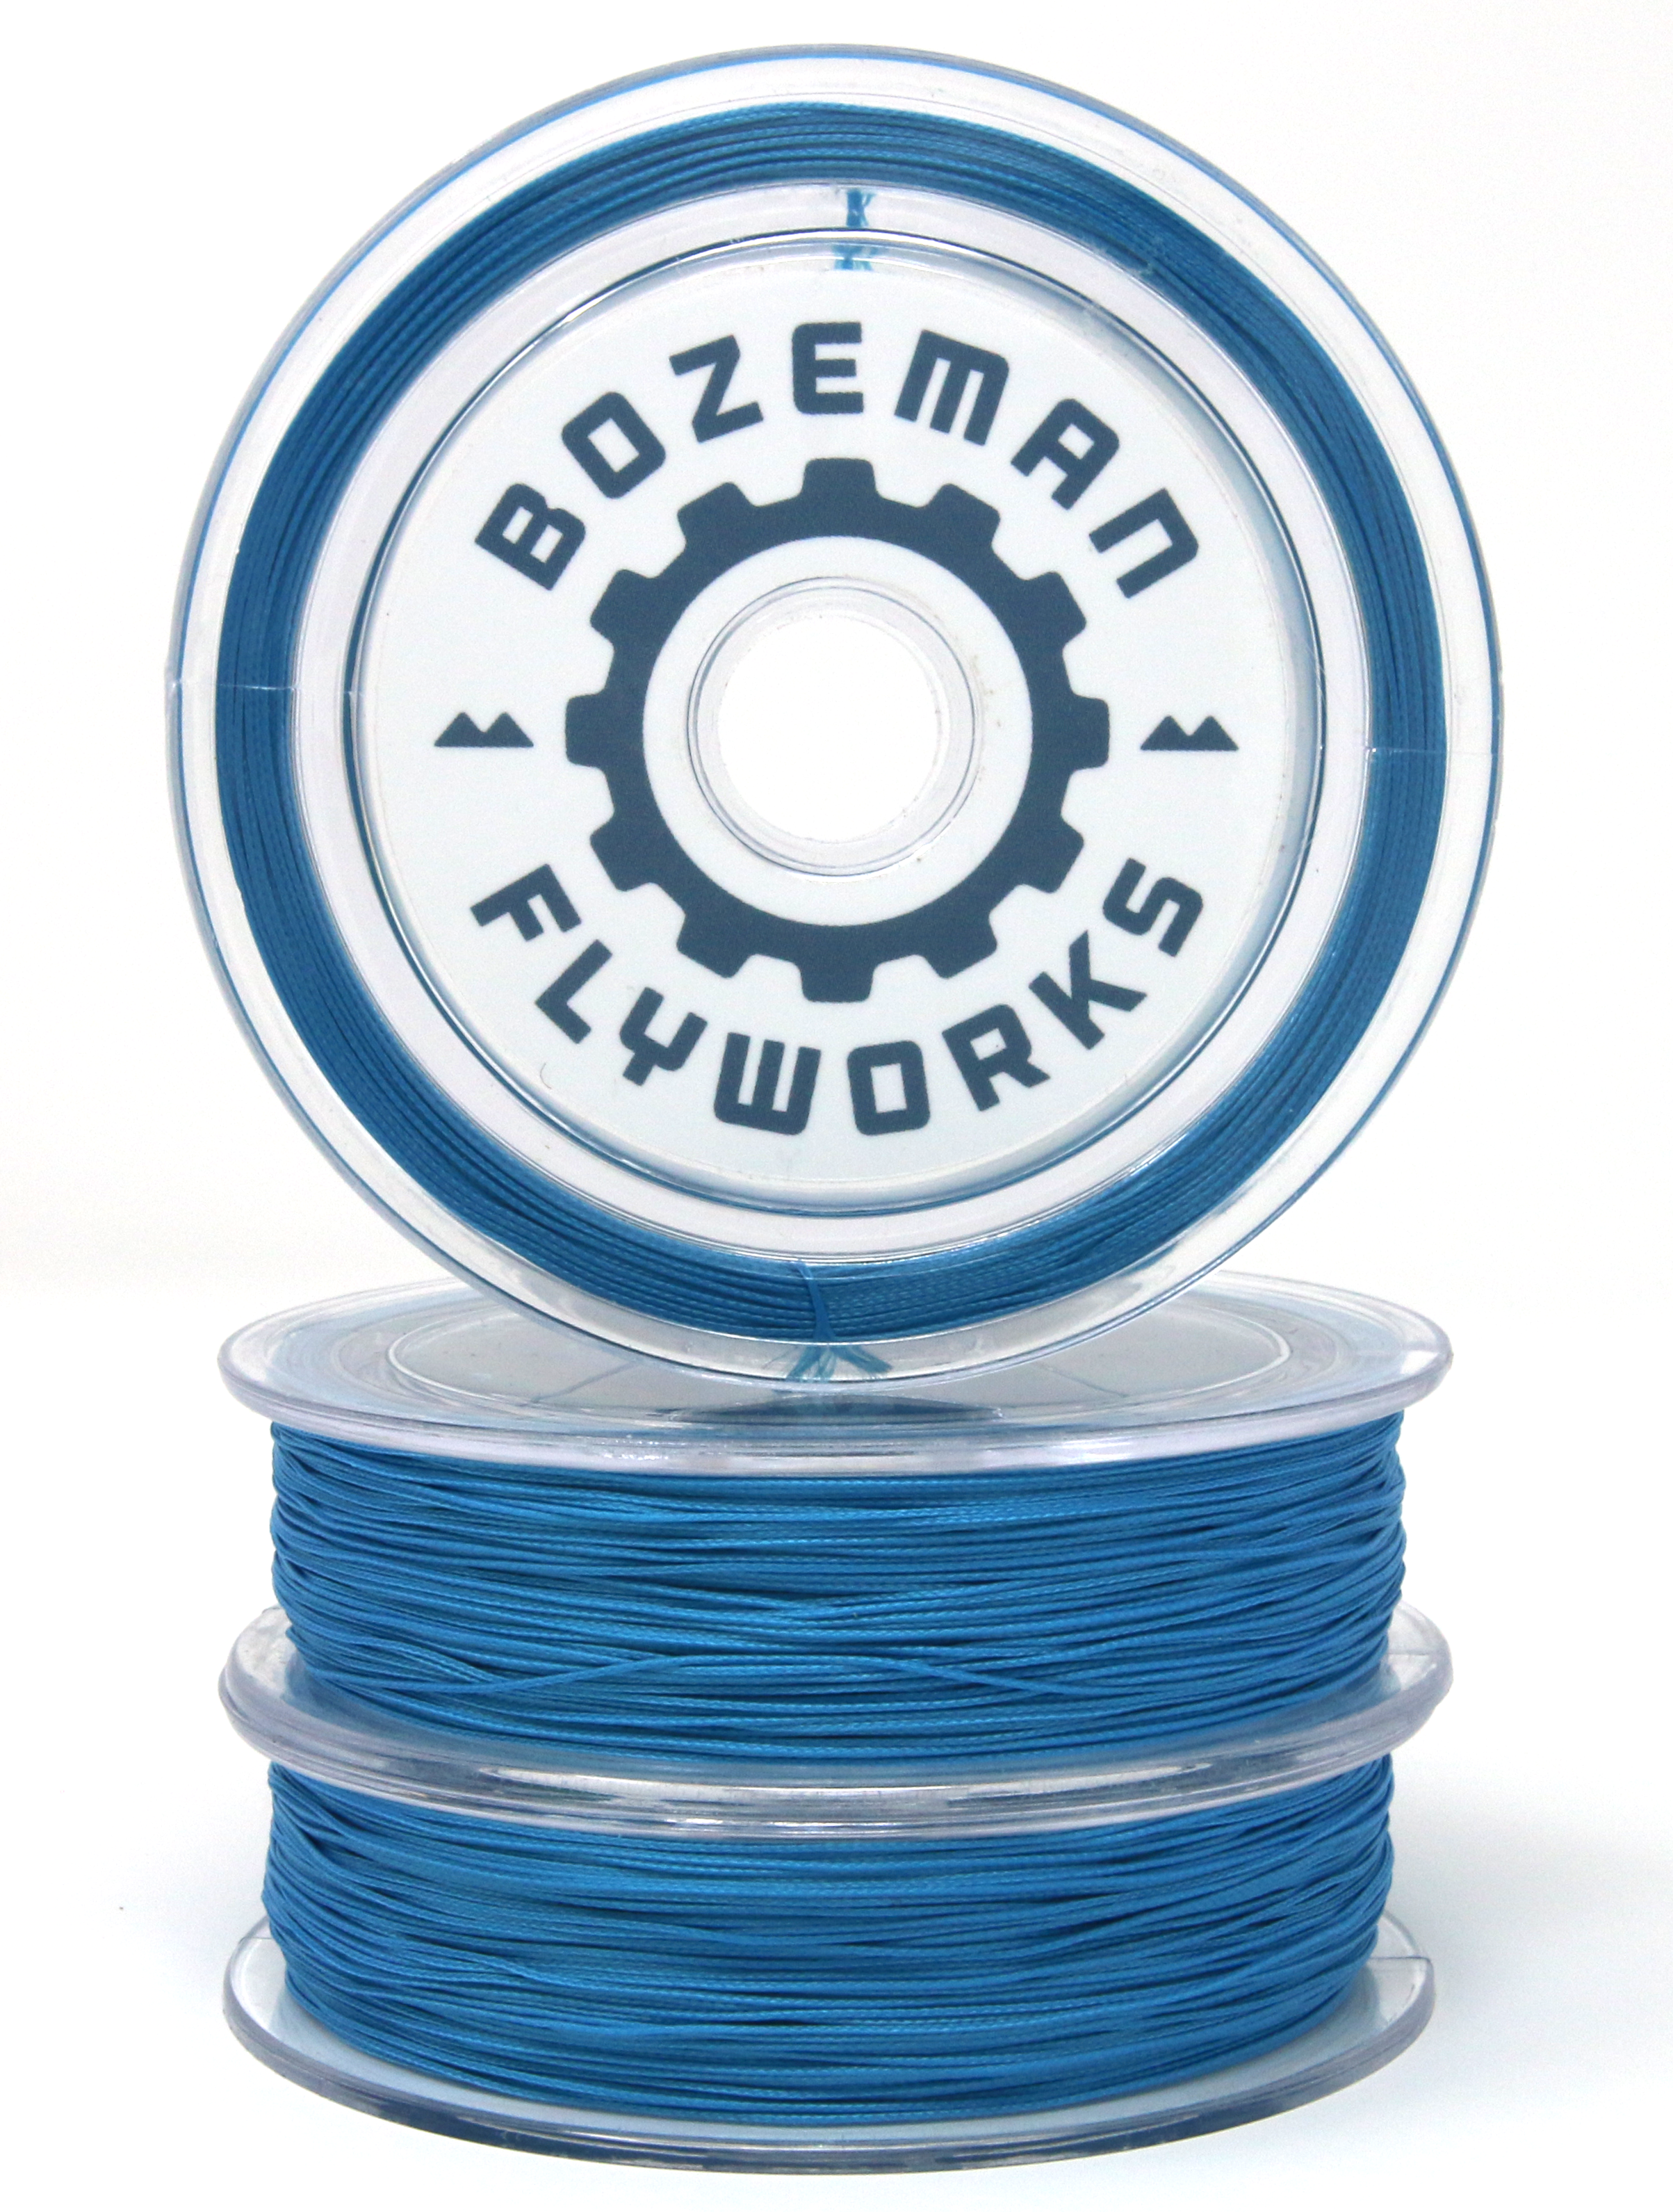  Bozeman FlyWorks Sinking Tip Fly Line (5wt) : Sports & Outdoors